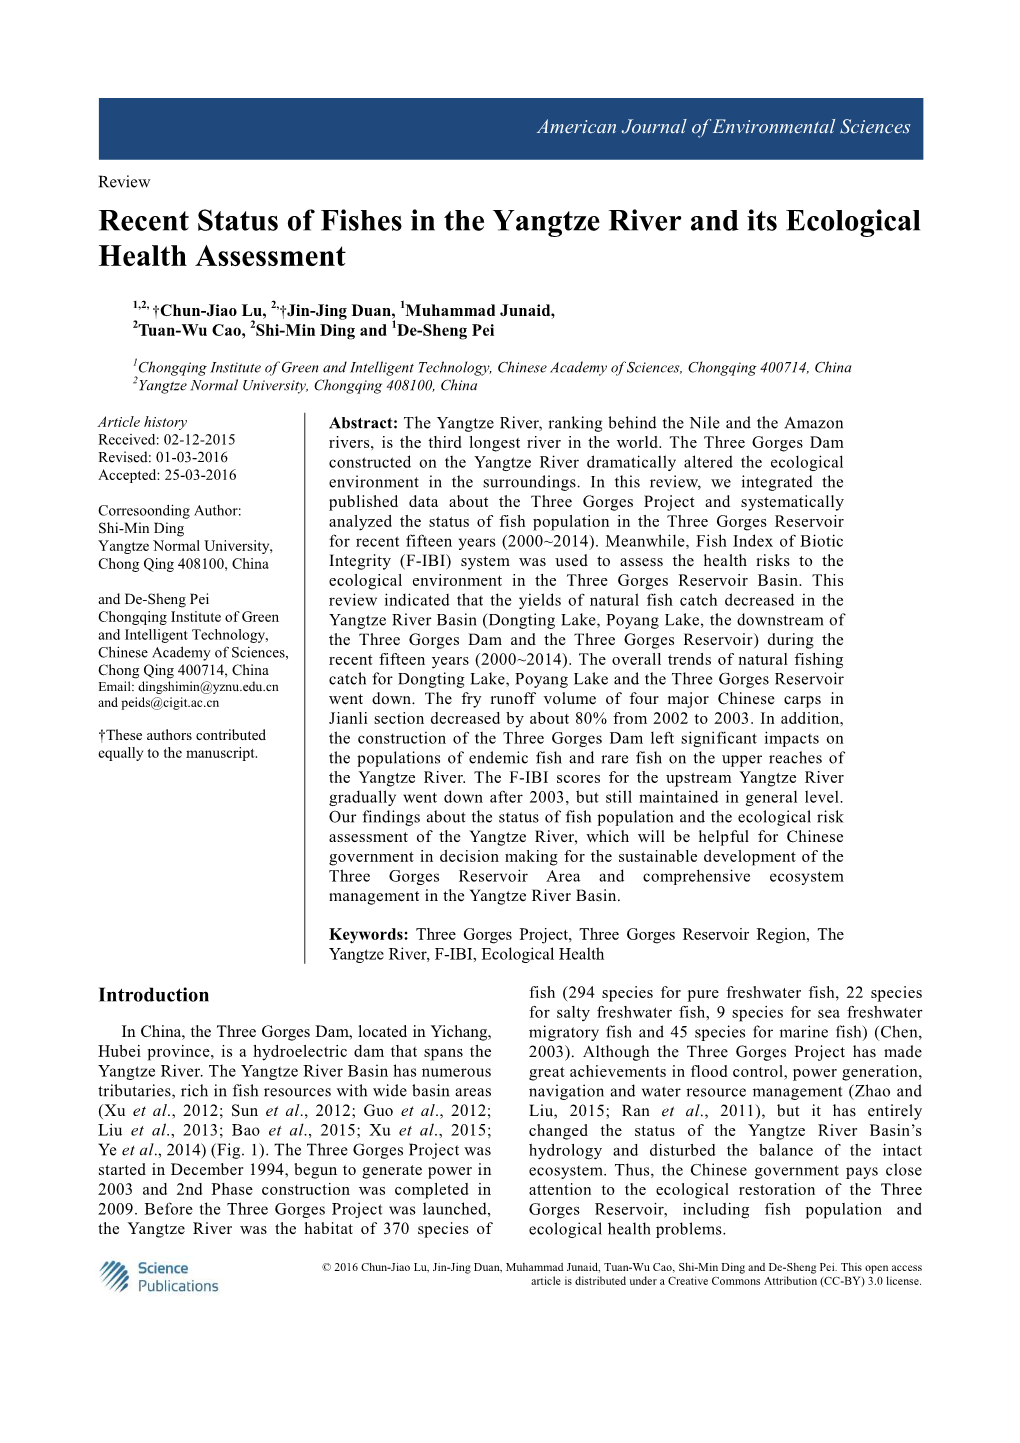 Recent Status of Fishes in the Yangtze River and Its Ecological Health Assessment